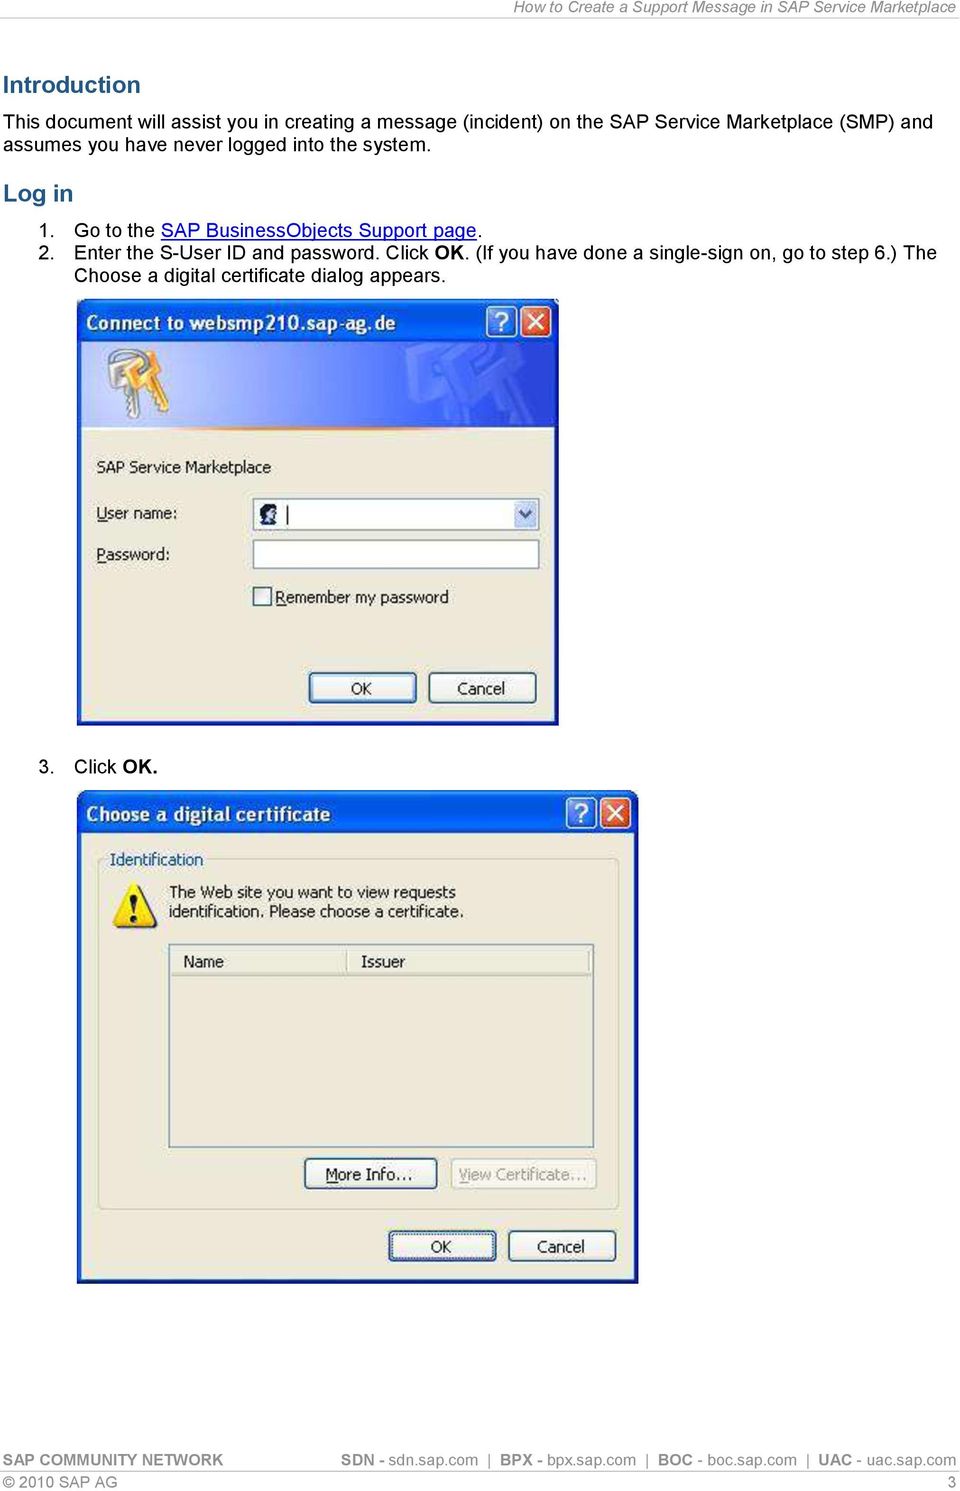 Go to the SAP BusinessObjects Support page. 2. Enter the S-User ID and password. Click OK.